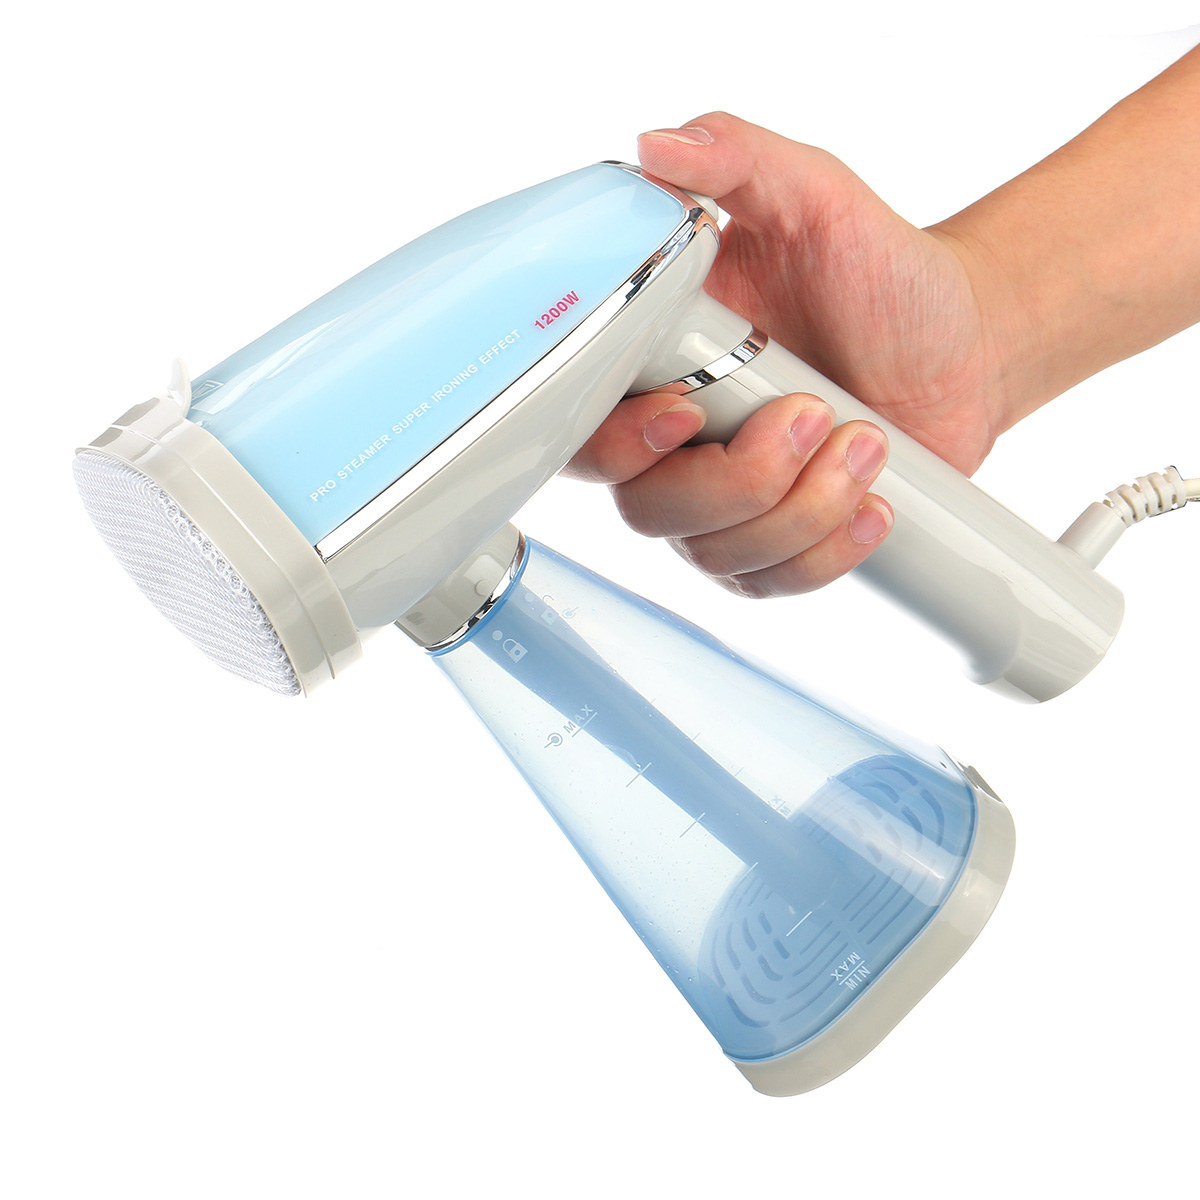 a model&#x27;s hand holds up the handheld garment steamer